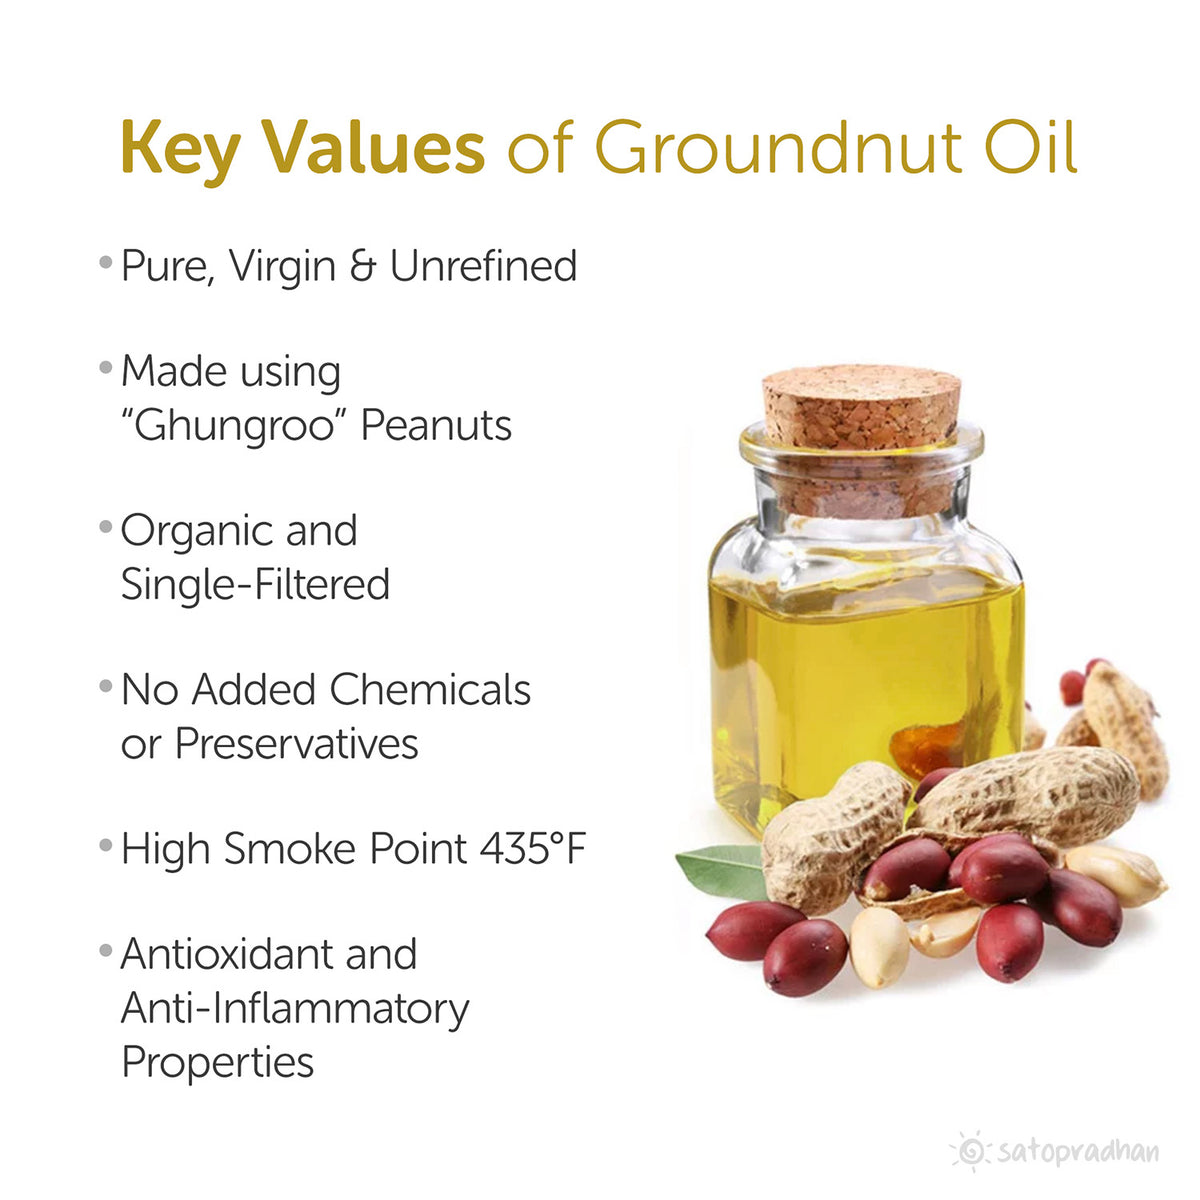 Organic Groundnut/Peanut Oil - Mungfali Ka Tel 1000 ml - Pure, Unrefined, Single-Filtered, Virgin & Wooden Cold-pressed | No Preservatives|  Packed in a Reusable Glass Bottle | Kacchi Ghani Key Values